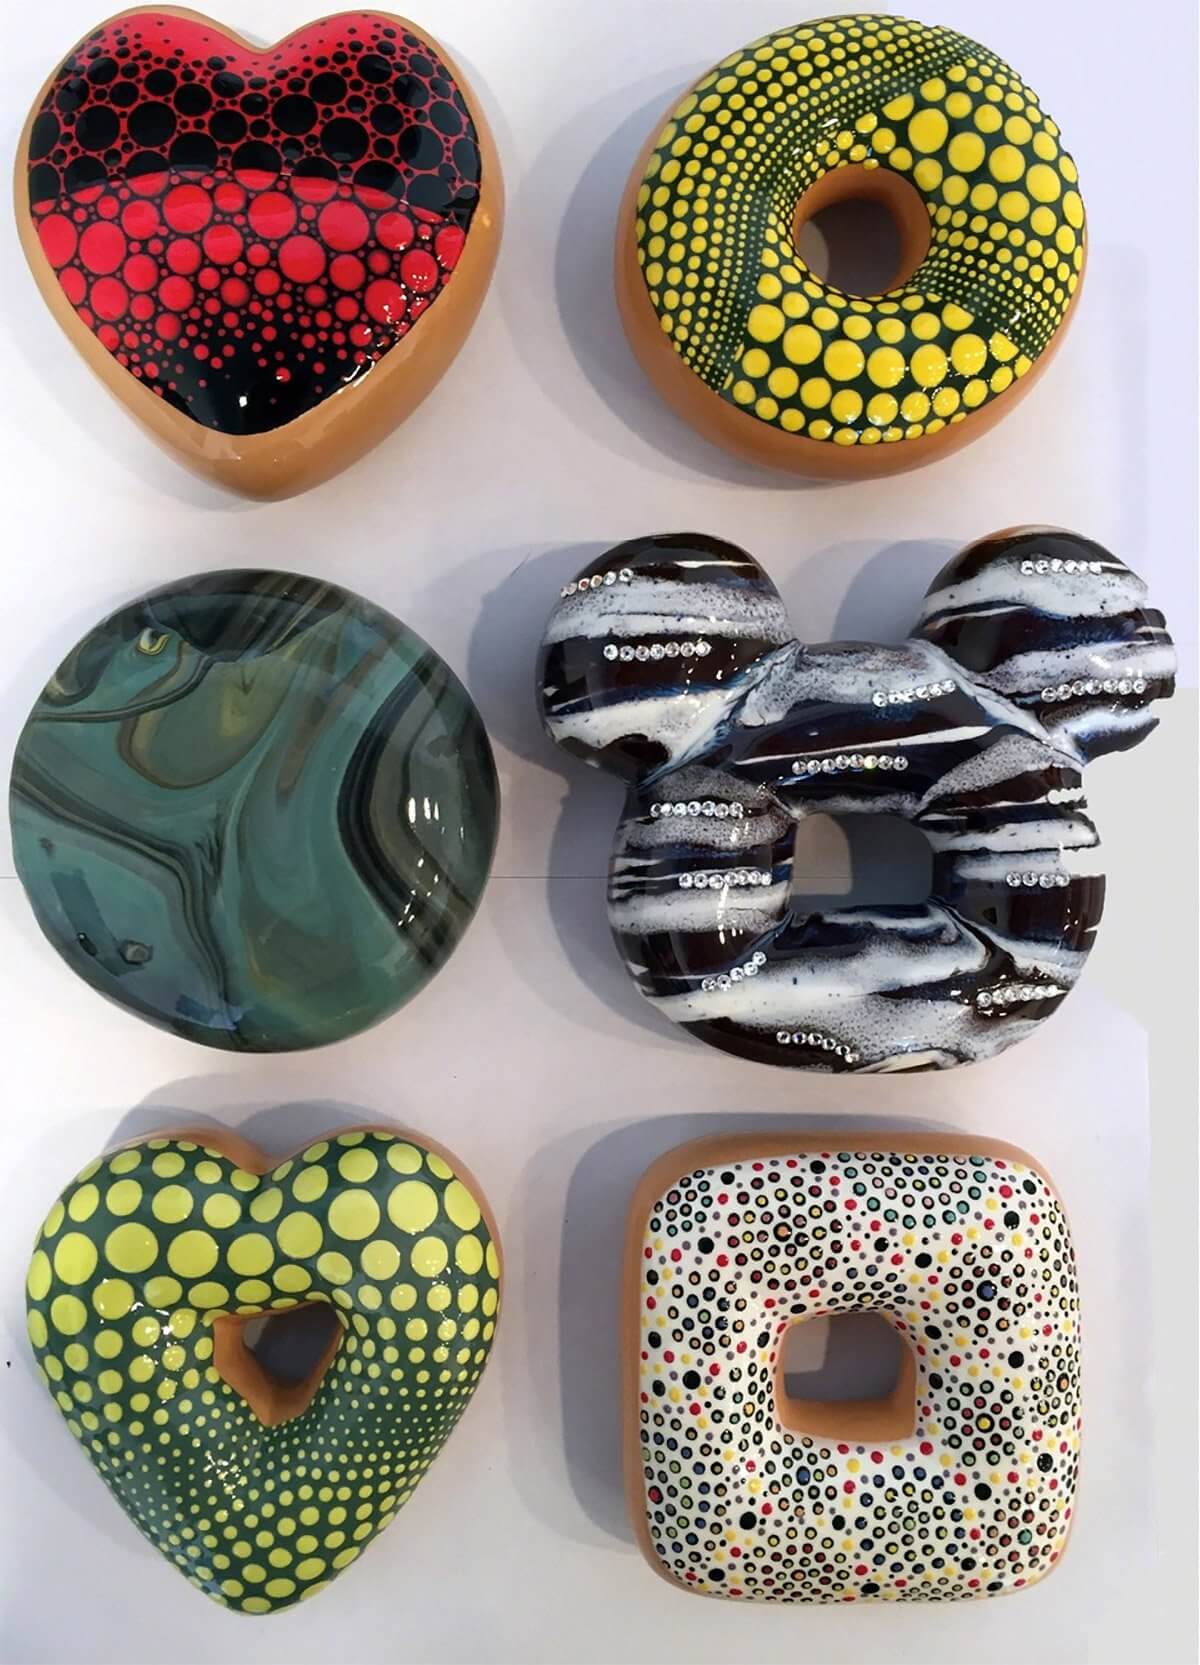 Ceramic Donuts by Jae Yong Kim That Are Too Good Looking Not To Eat1200 x 1665